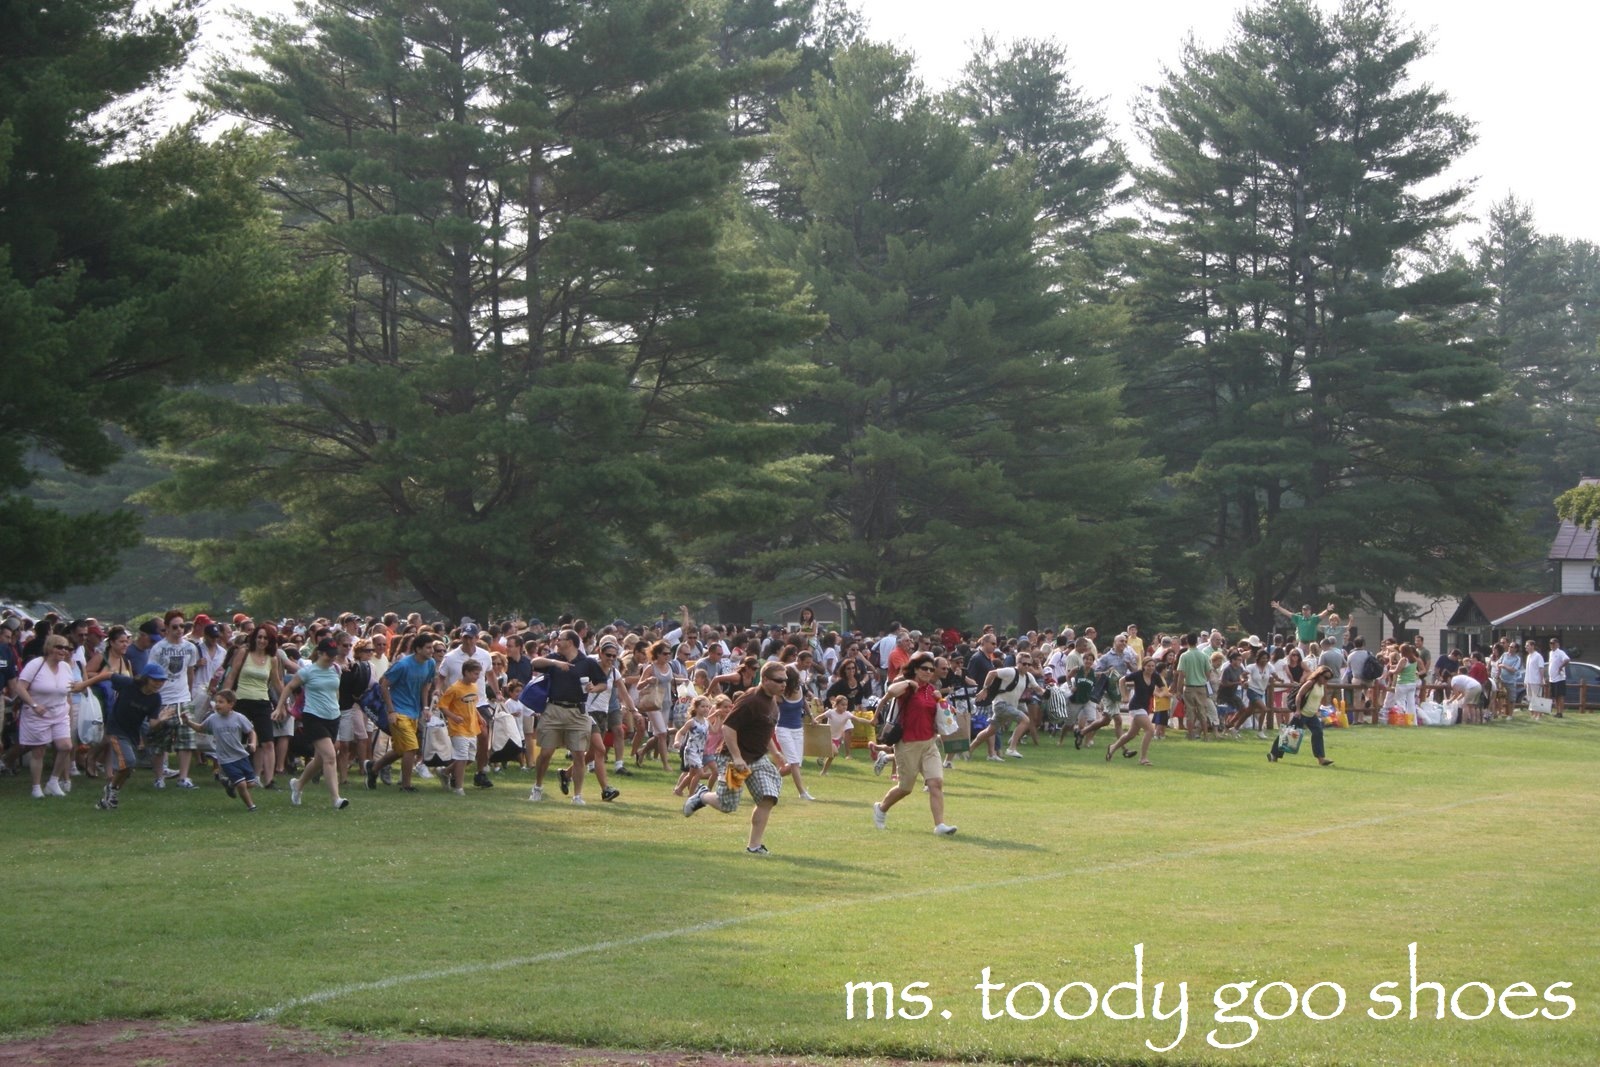 Letters From Camp: "What I Need For Visiting Day" by Ms. Toody Goo Shoes